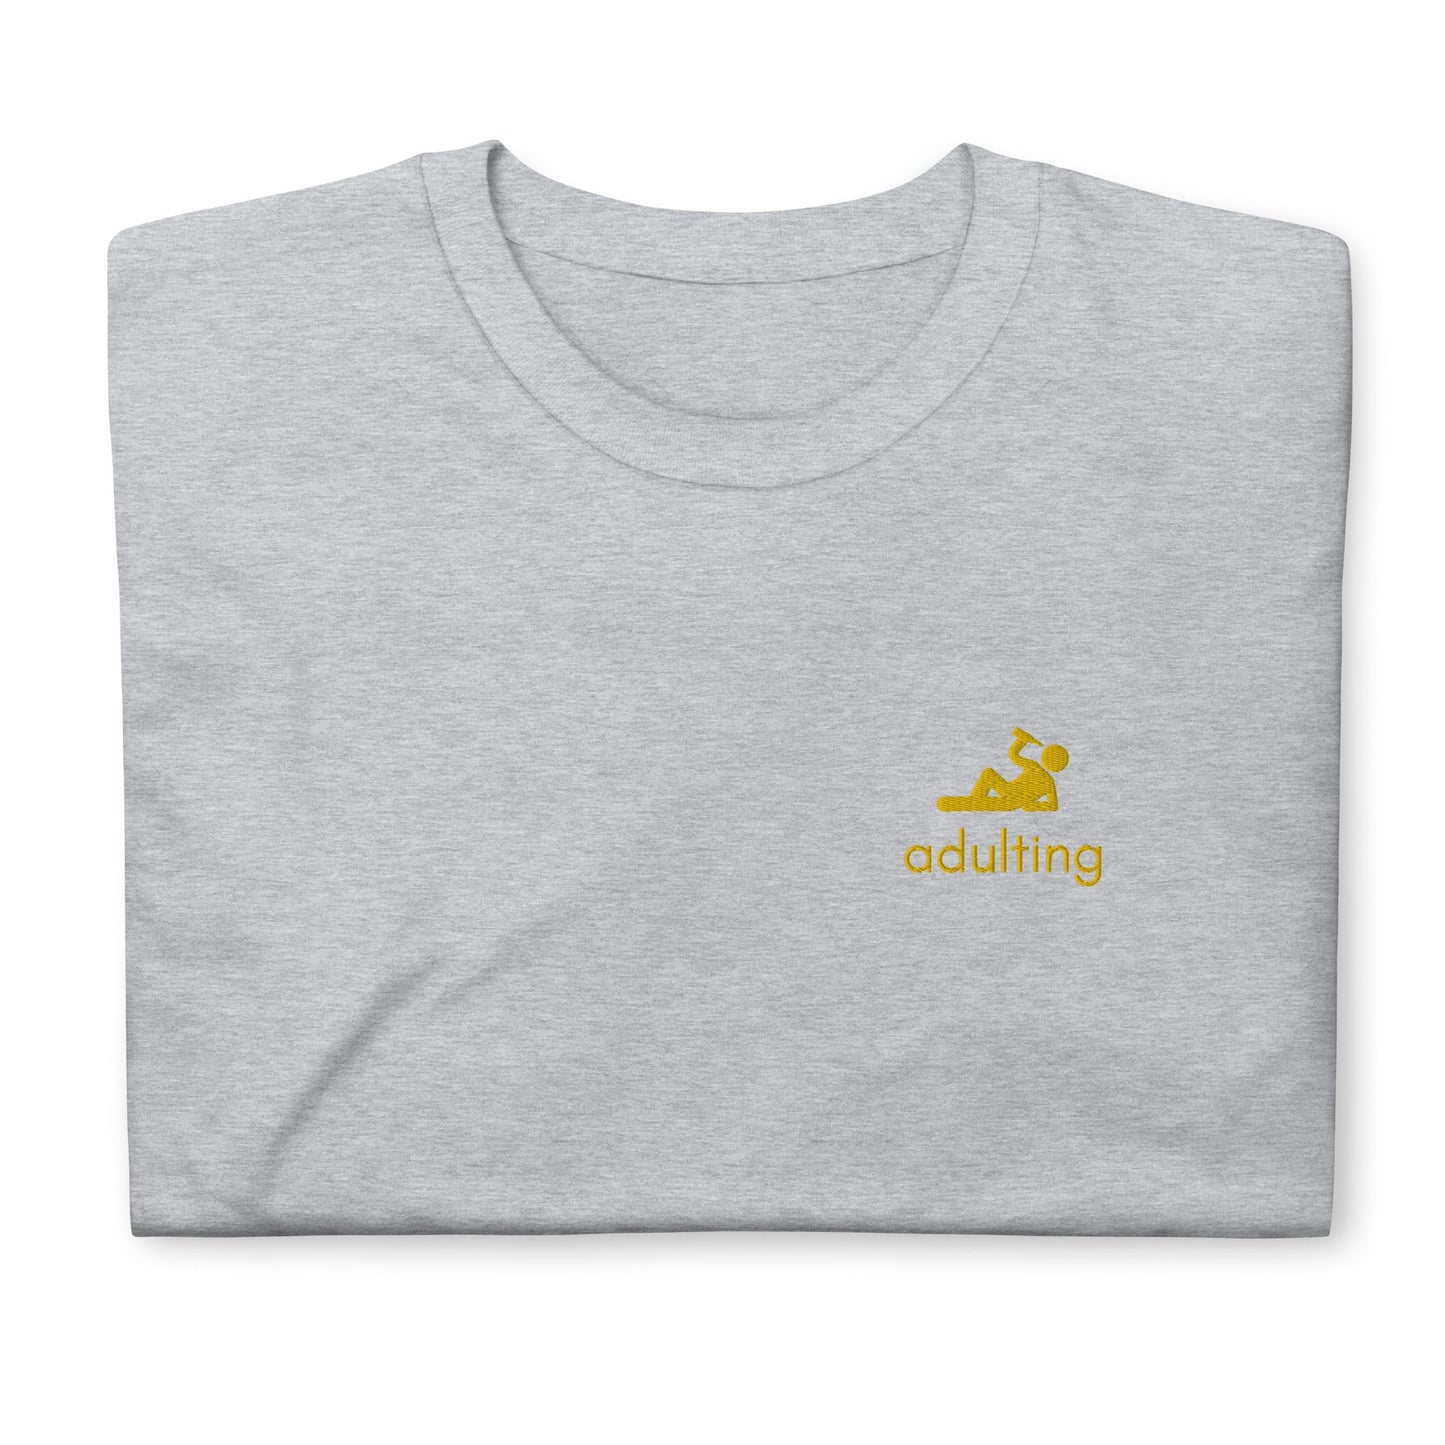 Adulting Embroidered Short-Sleeve Unisex T-Shirt - chucklecouture co.